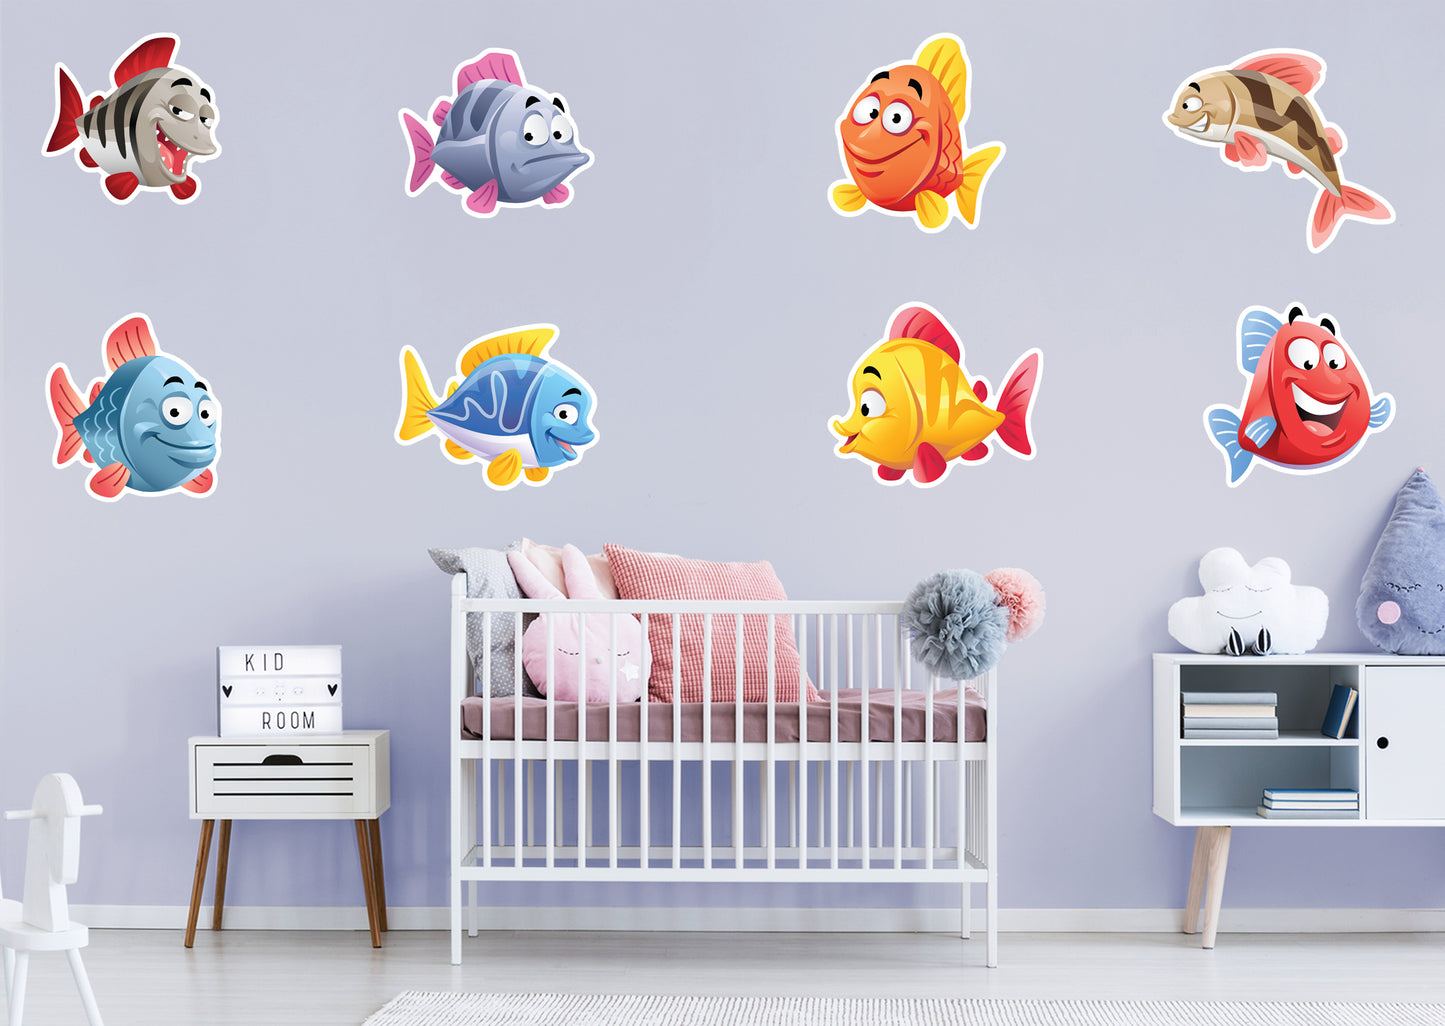 Nursery:  Fish Family Collection        -   Removable Wall   Adhesive Decal